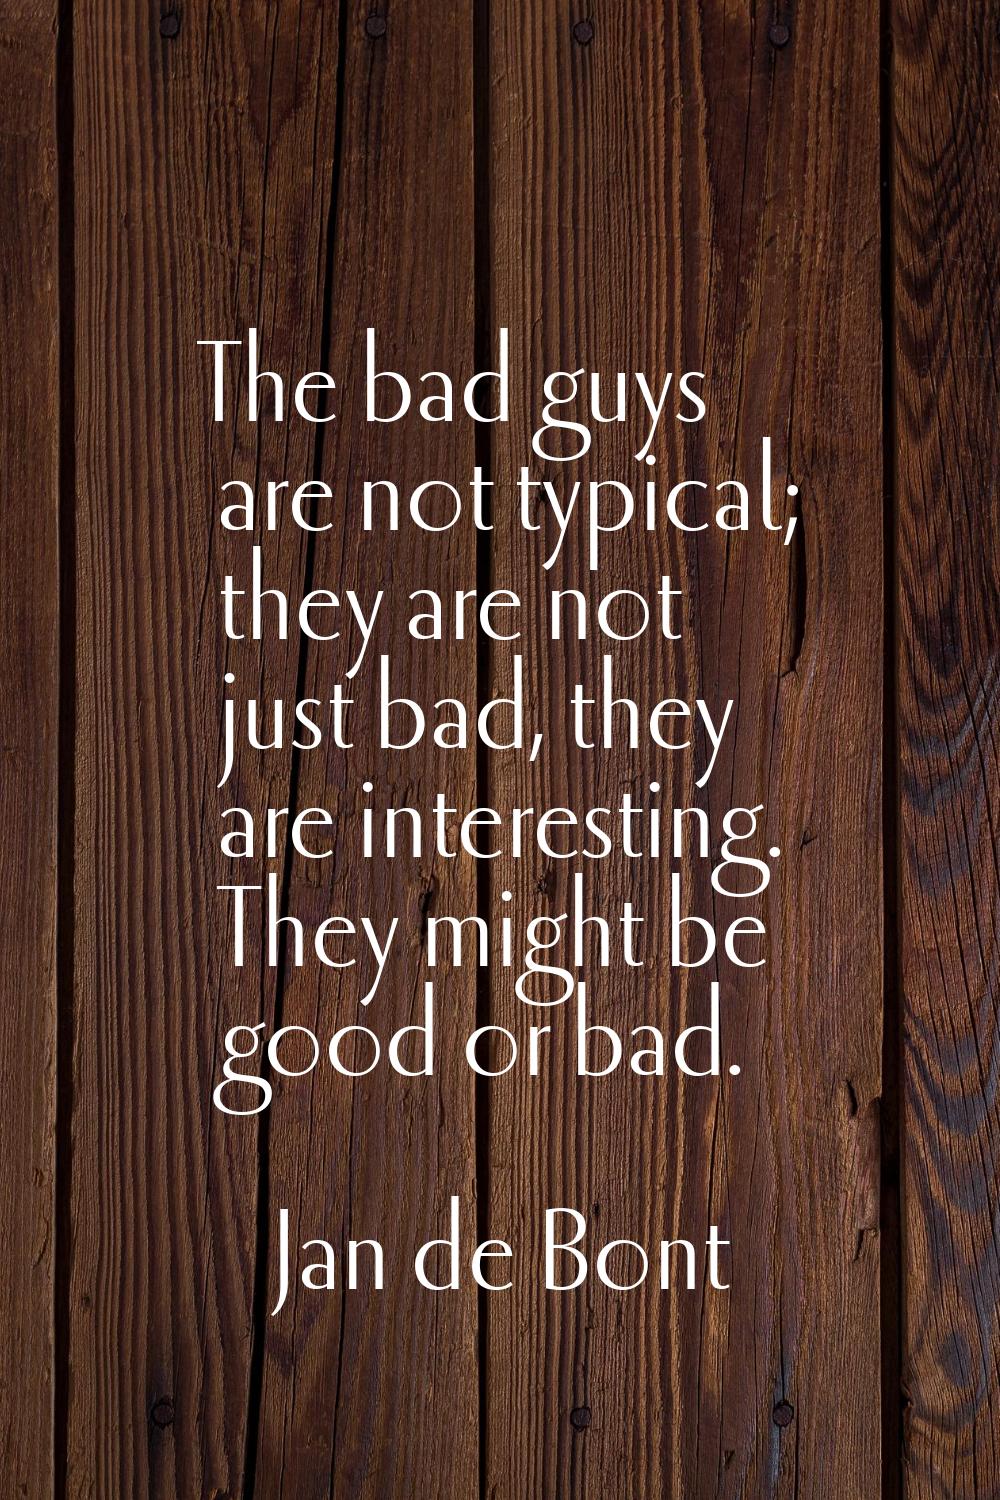 The bad guys are not typical; they are not just bad, they are interesting. They might be good or ba